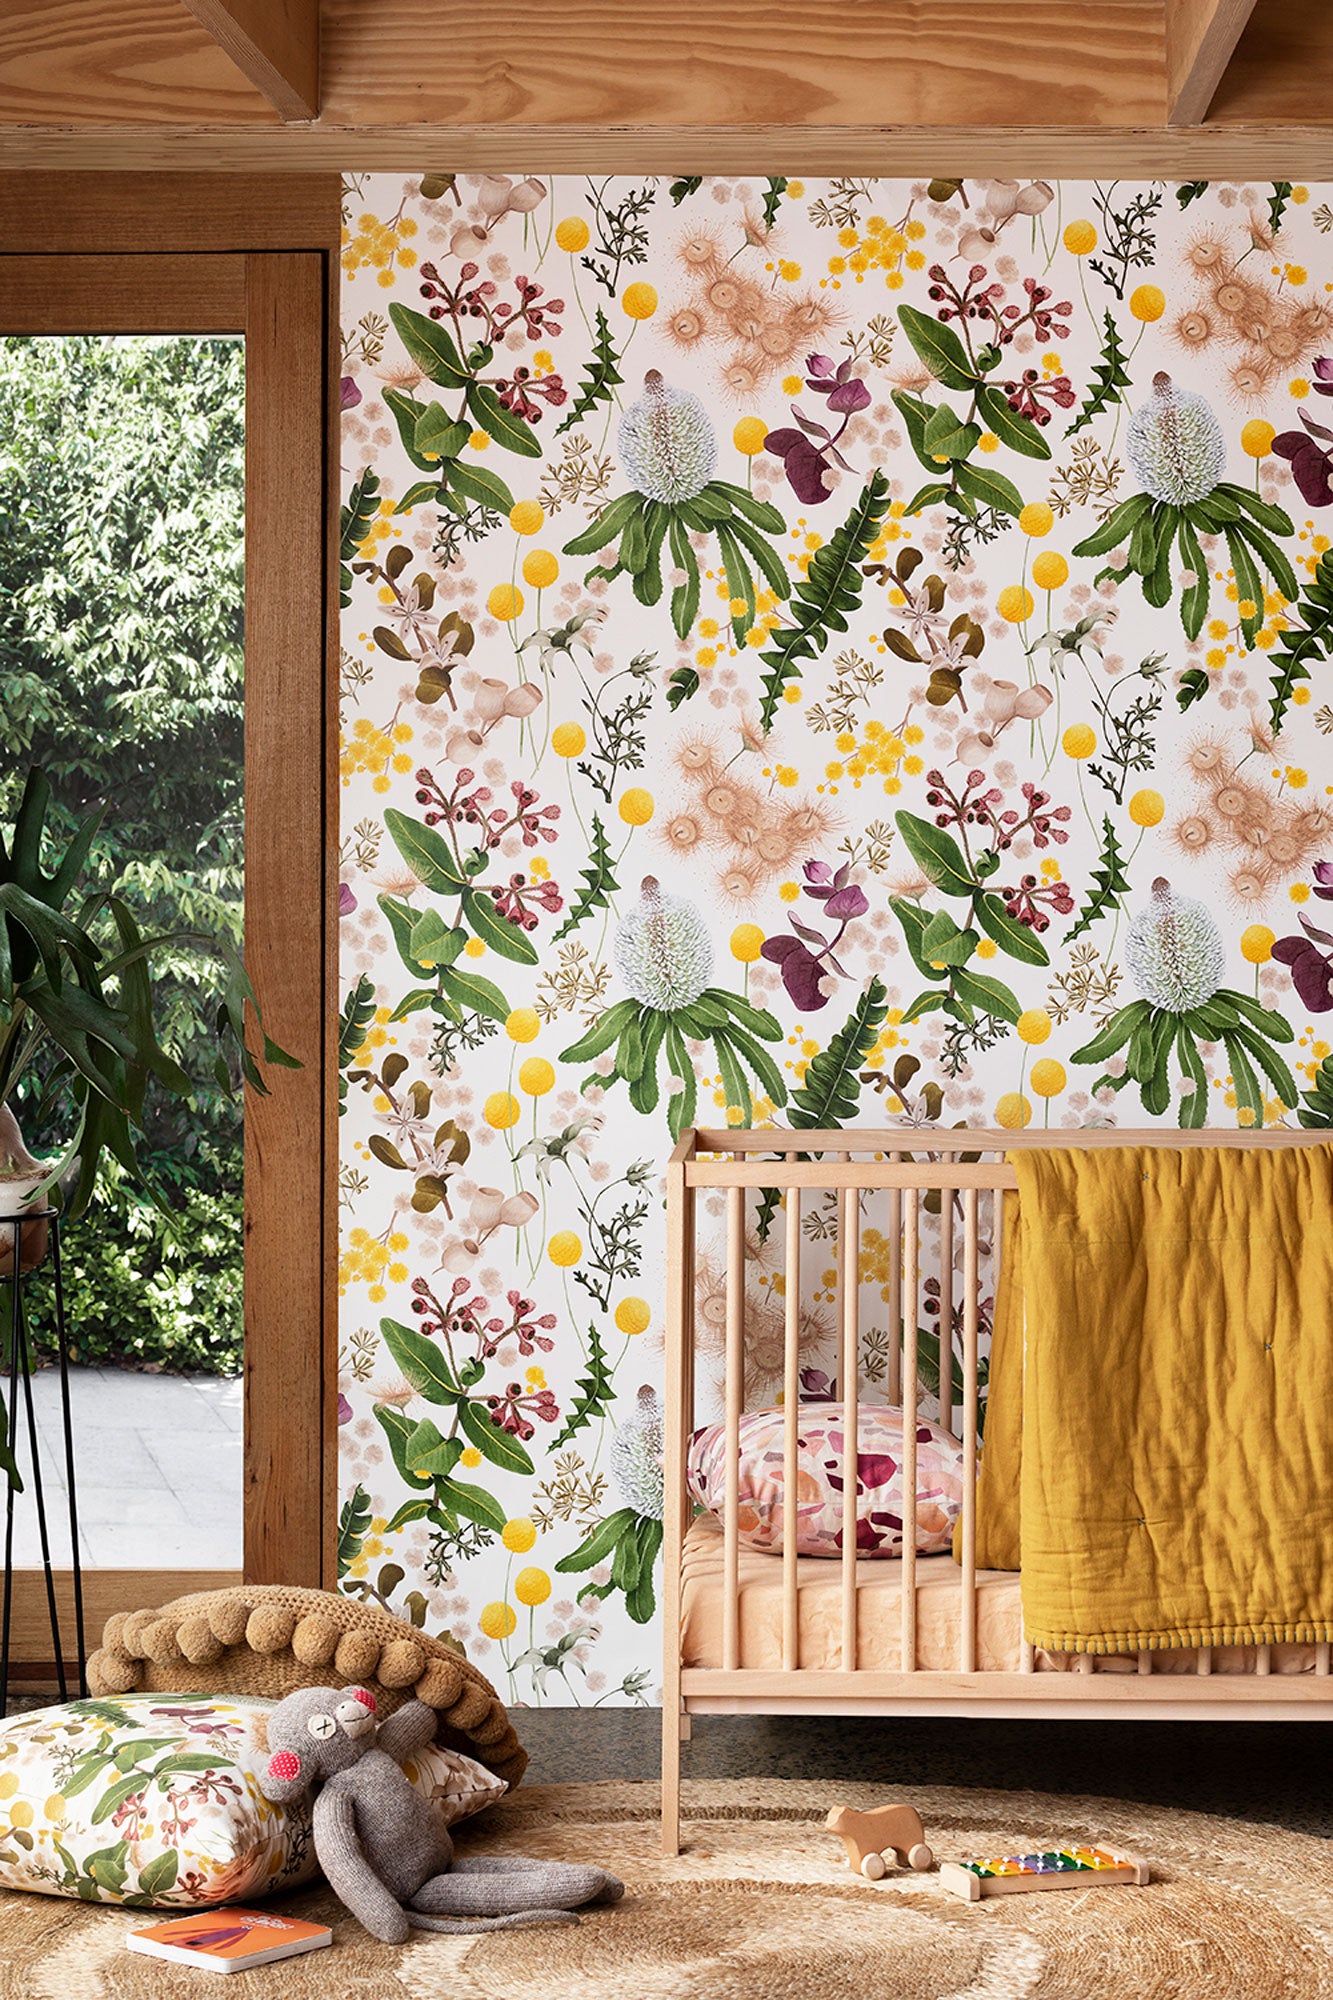 A maximalist baby nursery with a wall papered in a large-scale botanical print in pink, yellow, green and cream.